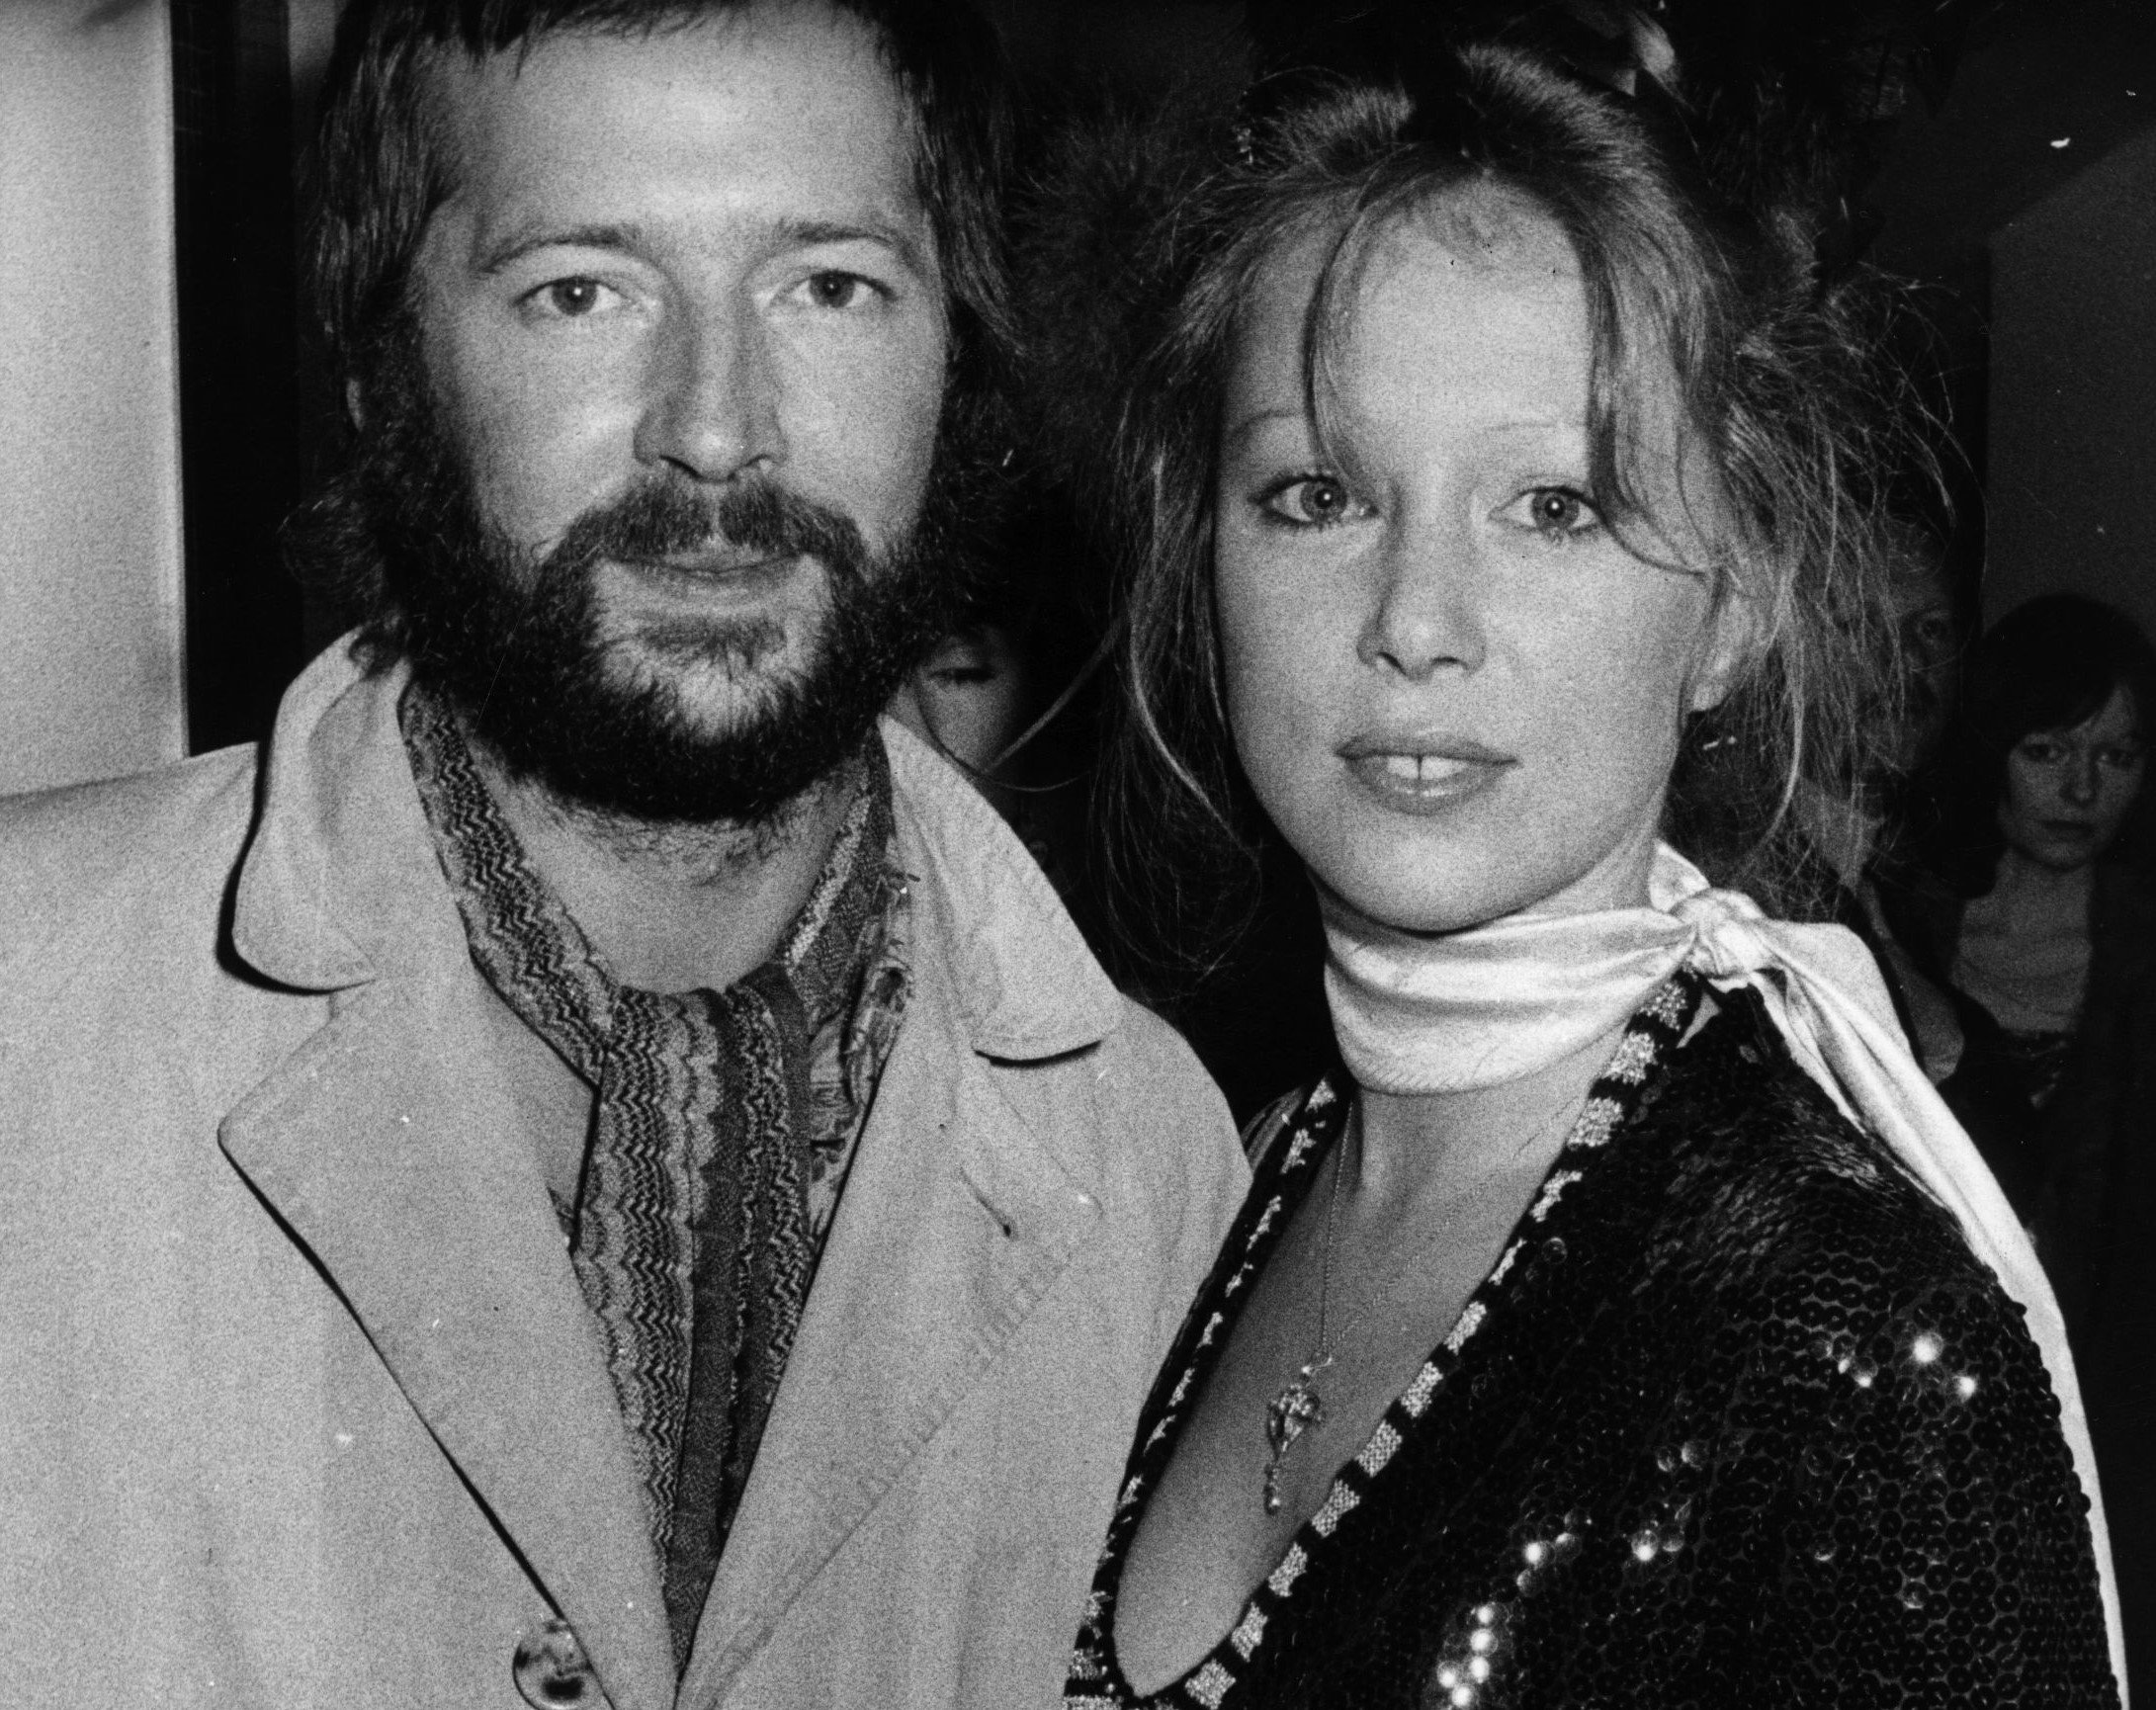 A black and white picture of Eric Clapton and Pattie Boyd both wearing scarves around their necks.